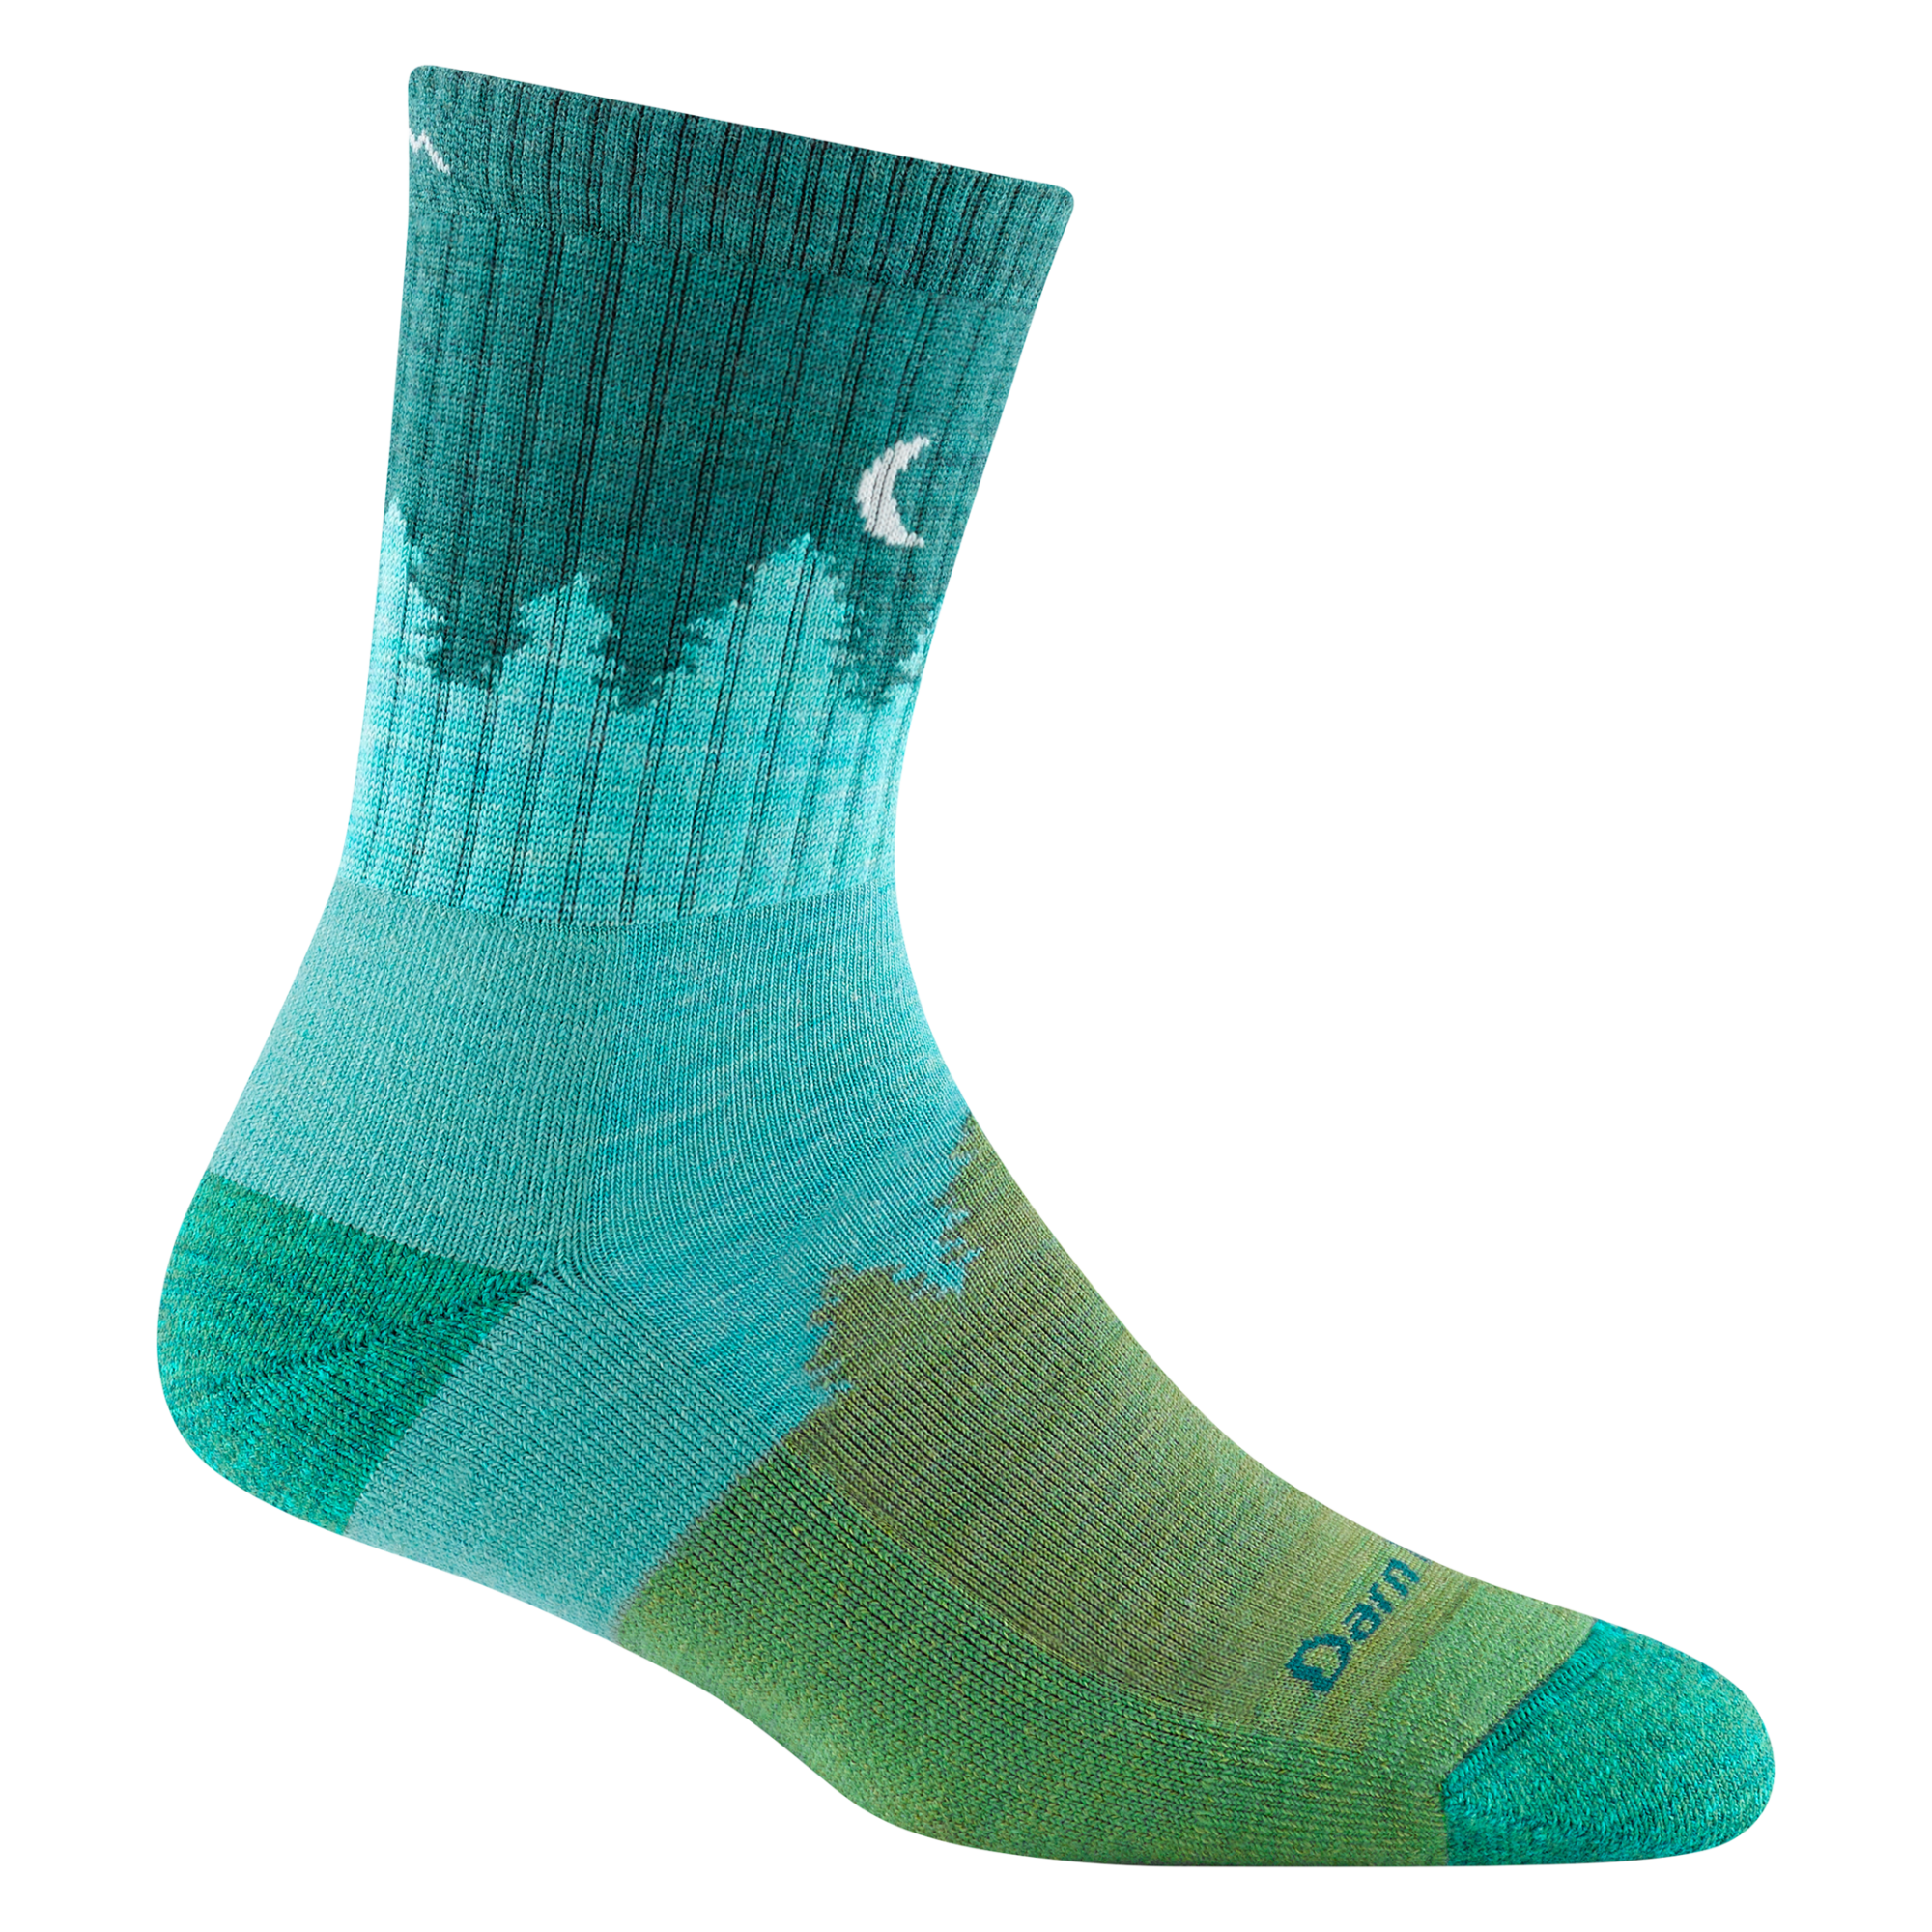 1971 women's treeline micro crew hiking sock in color aqua with teal toe/heel accents and tree silhouette